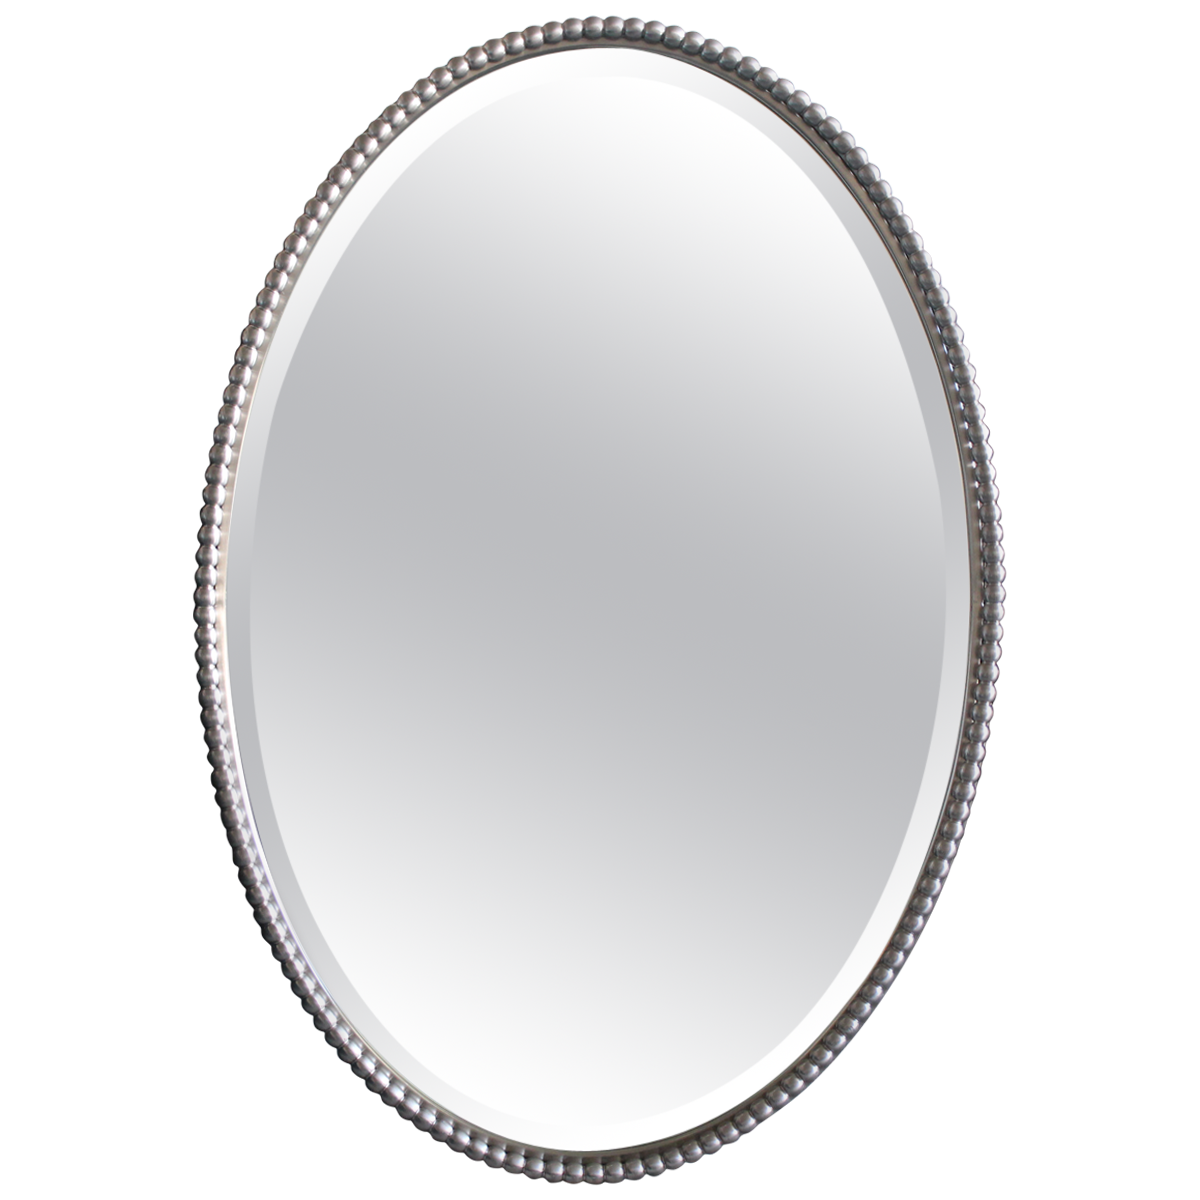 Silver Mirror Oval - oval stamp png download - 1200*1200 - Free ...